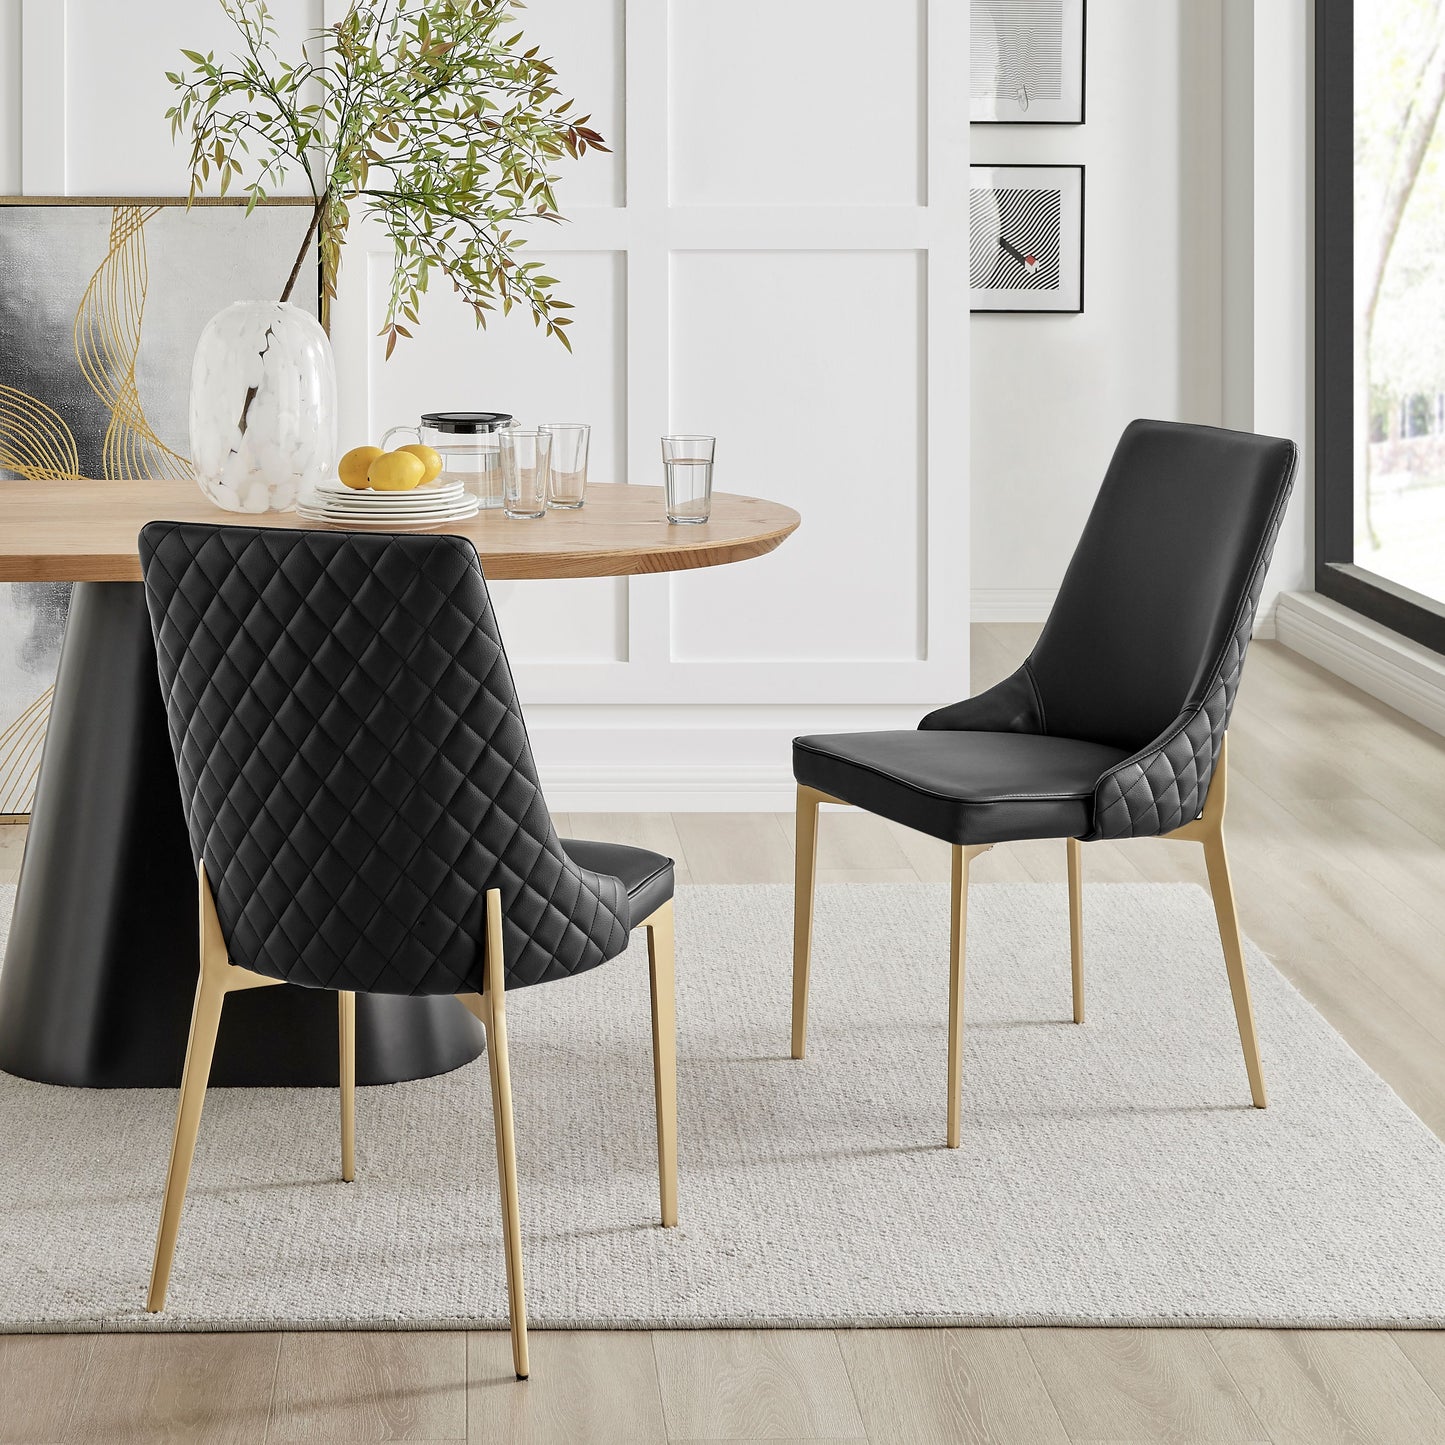 Black Dining Chair In Faux Leather With Gold Legs